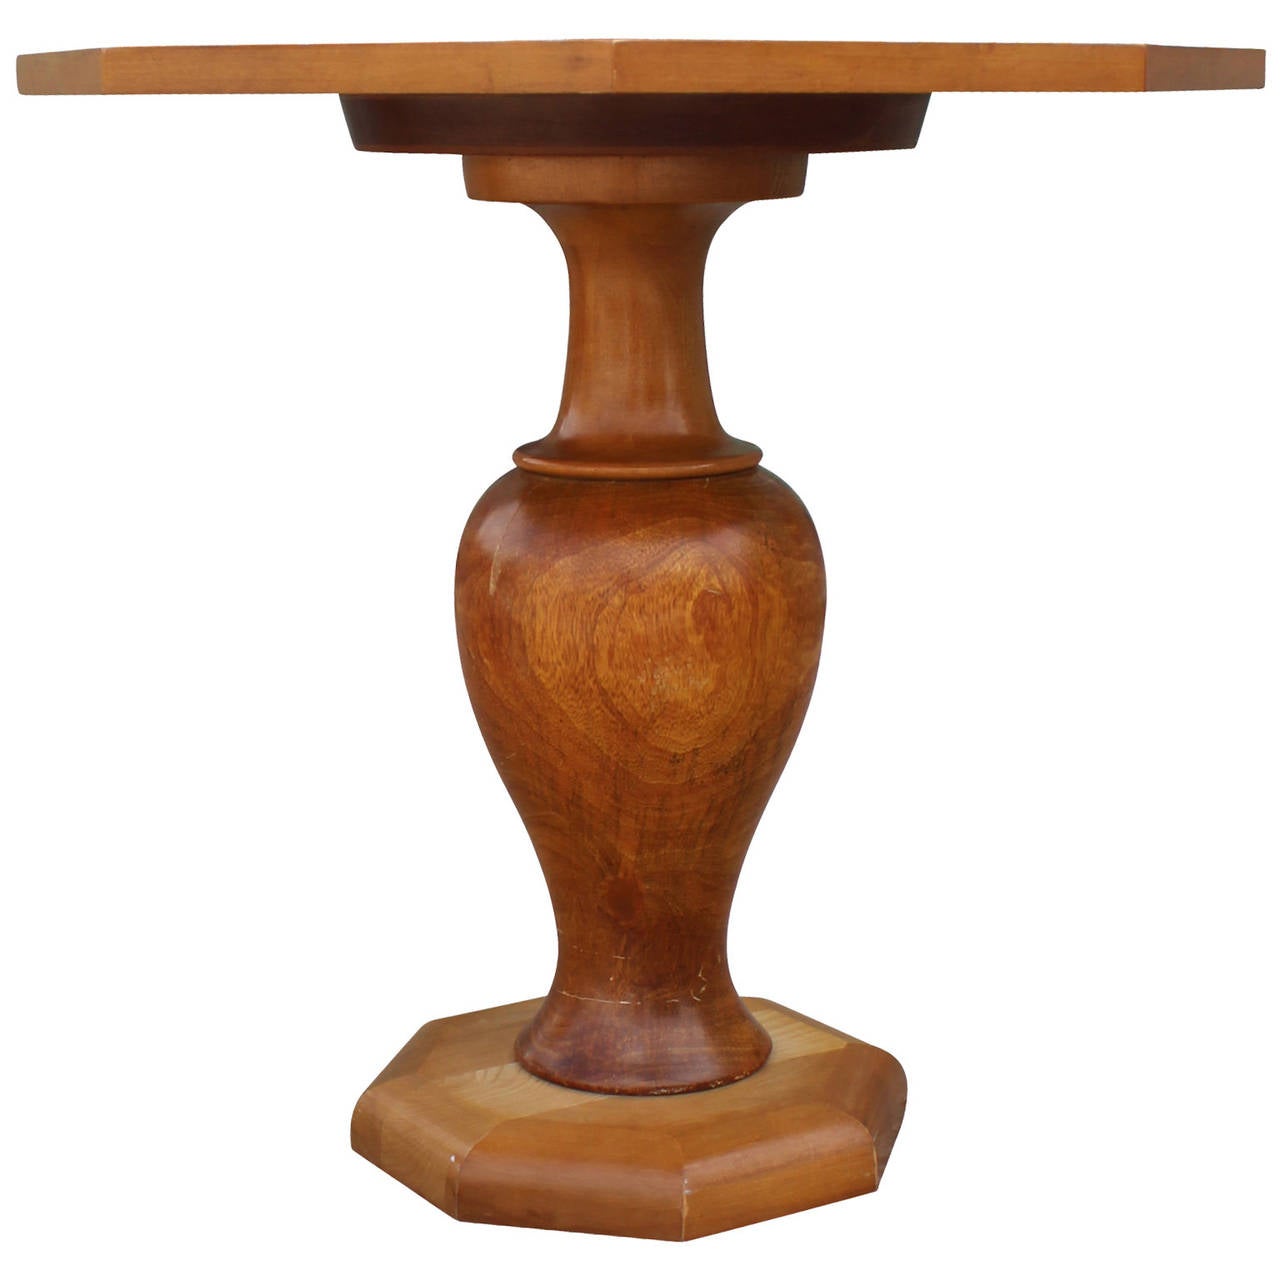 Lovely Octagonal shaped table on a turned wood base. Wood has a stunning grain. Perfect transitional piece.